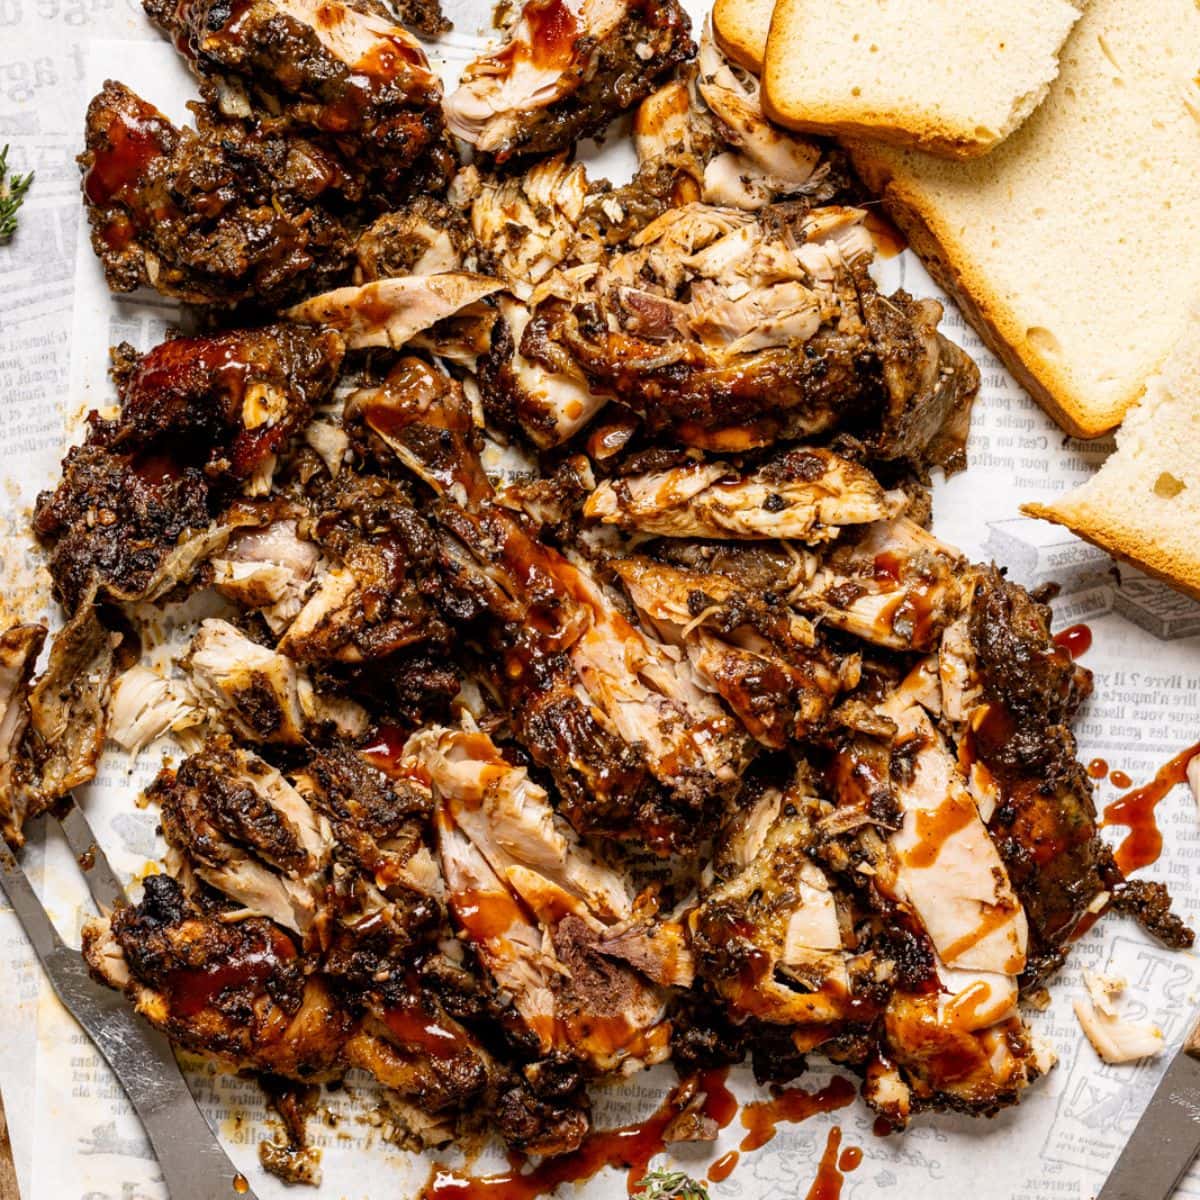 Chopped jerk chicken on a cutting board with BBQ sauce, bread, and a fork.